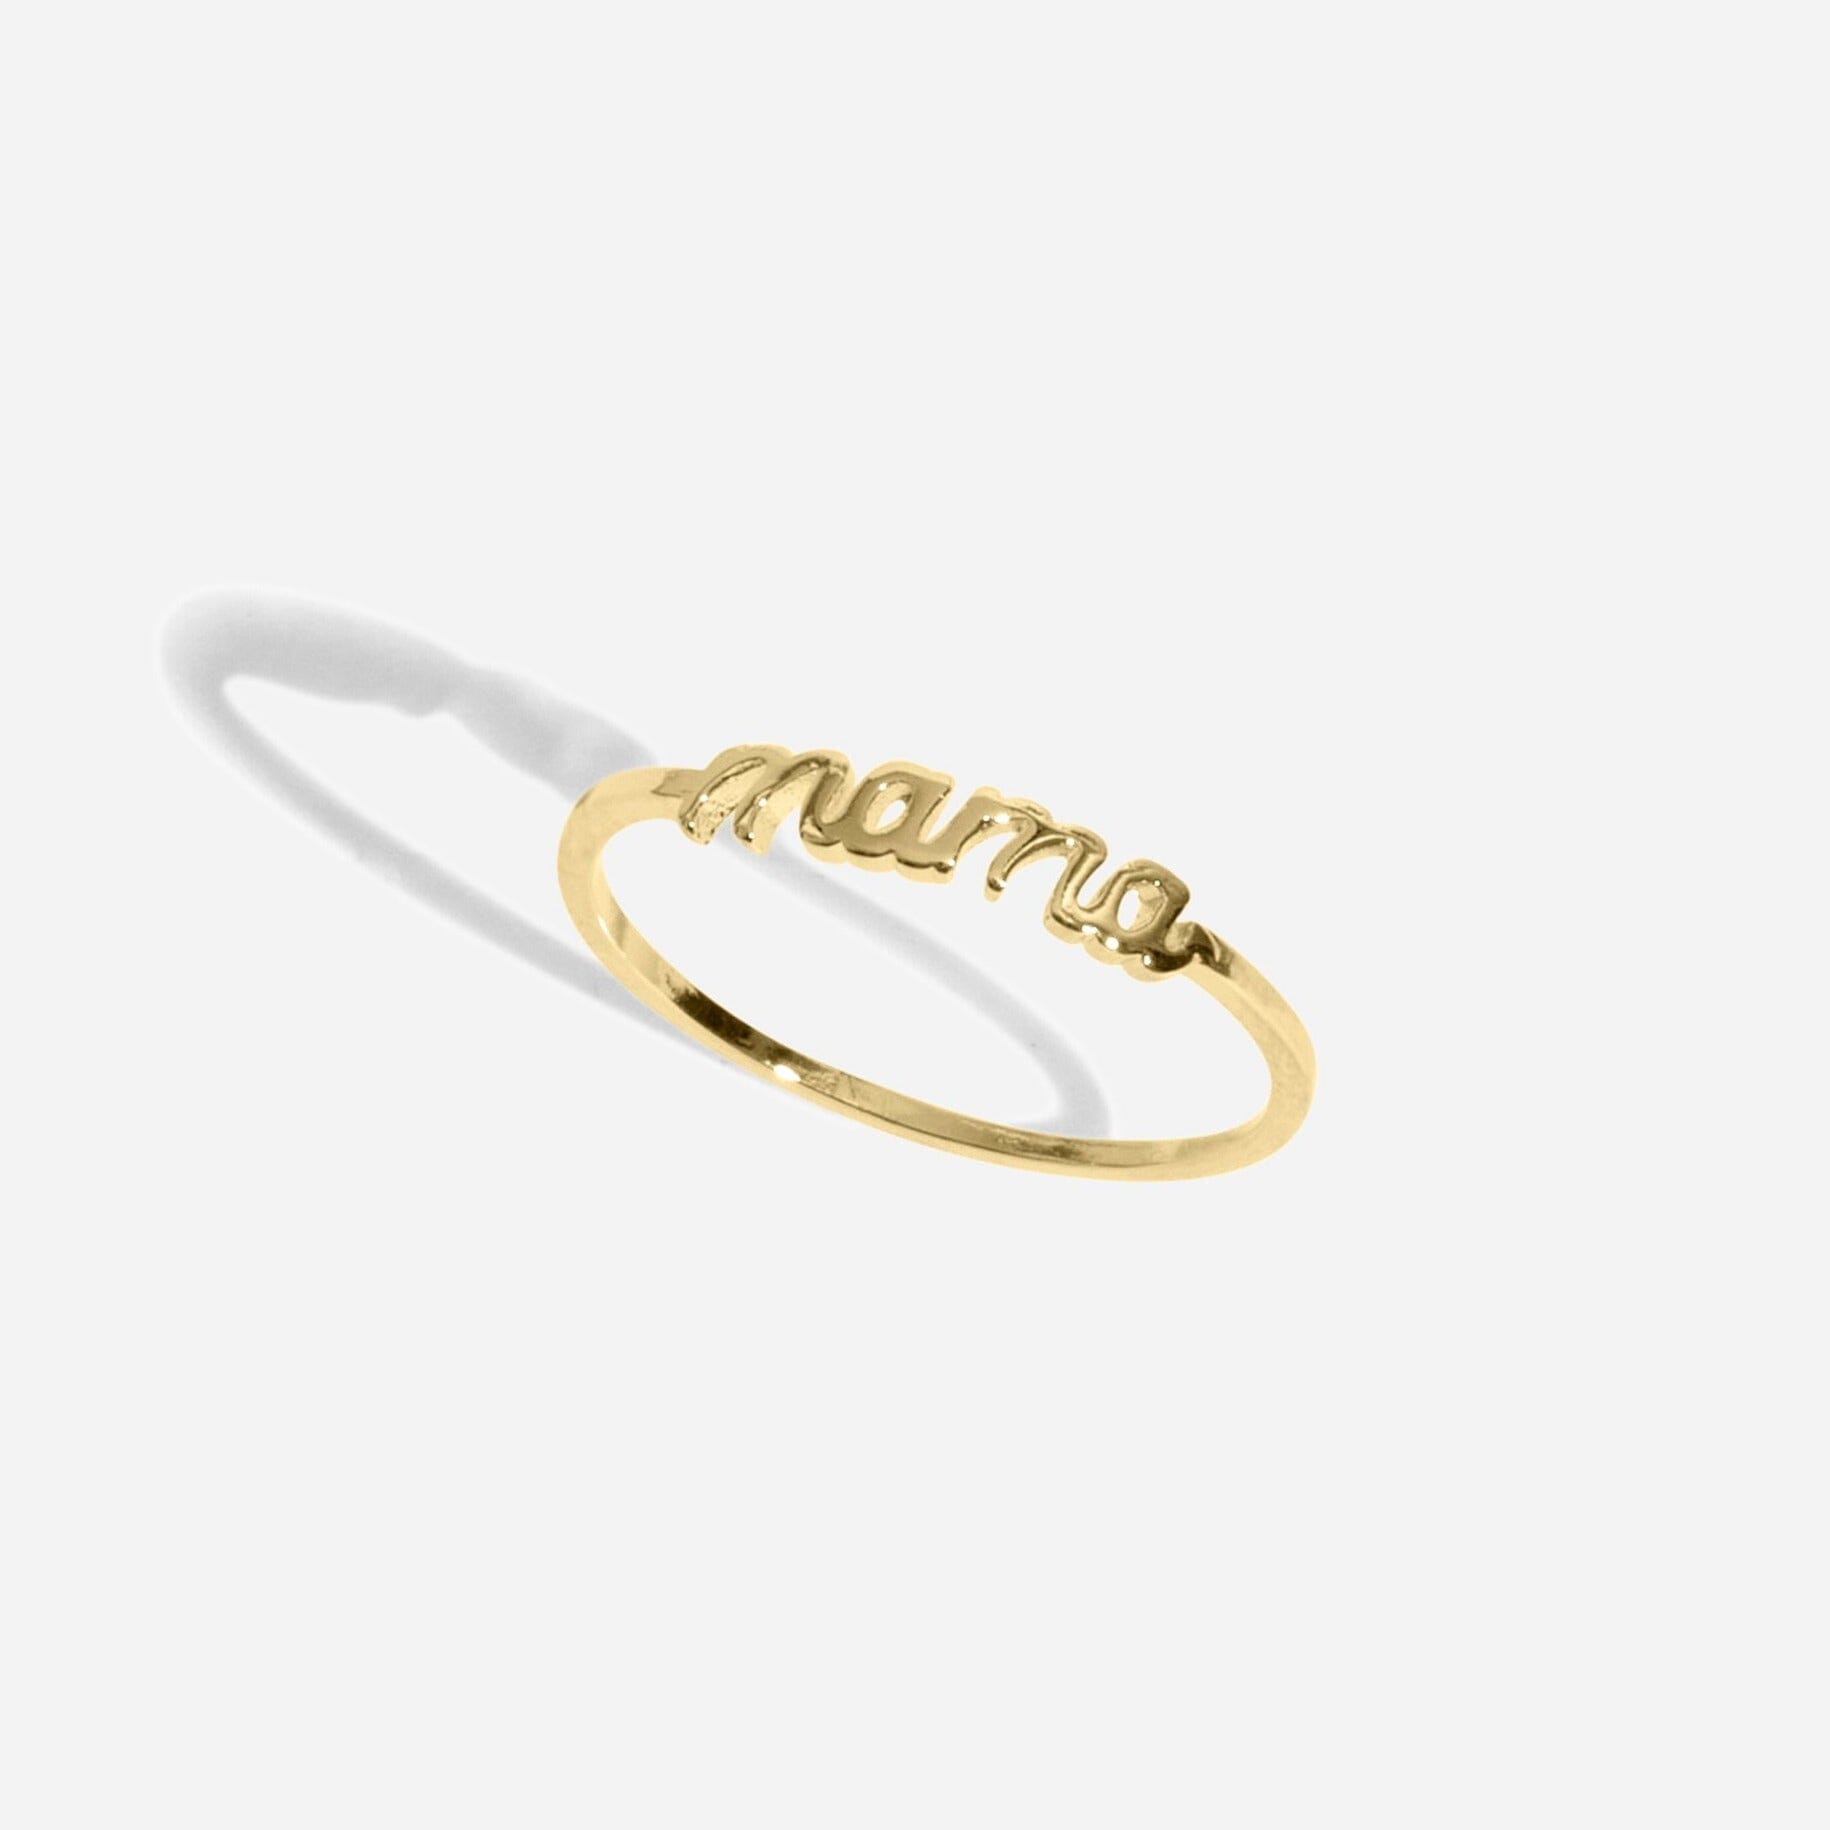 Dainty gold Mama Ring handmade in America by Katie Dean Jewelry, as seen on a natural white background, perfect for the dainty minimal jewelry lovers.